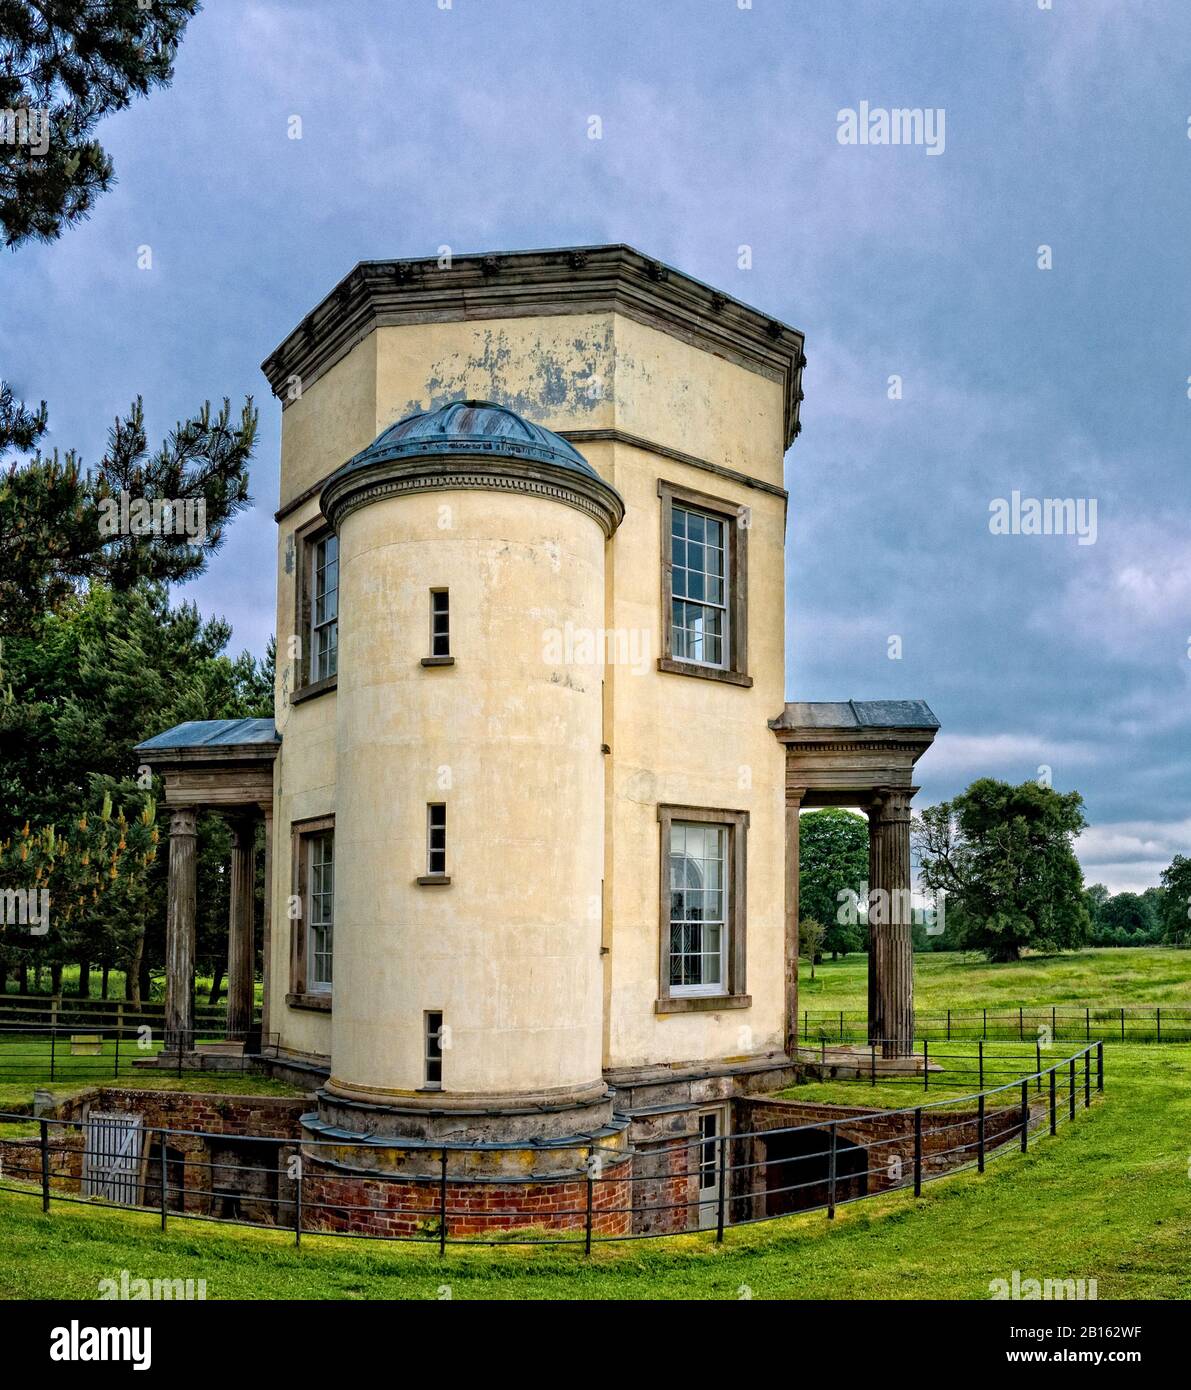 Outer building at Shugborough Hall historic Stately Home near Stafford, England Stock Photo